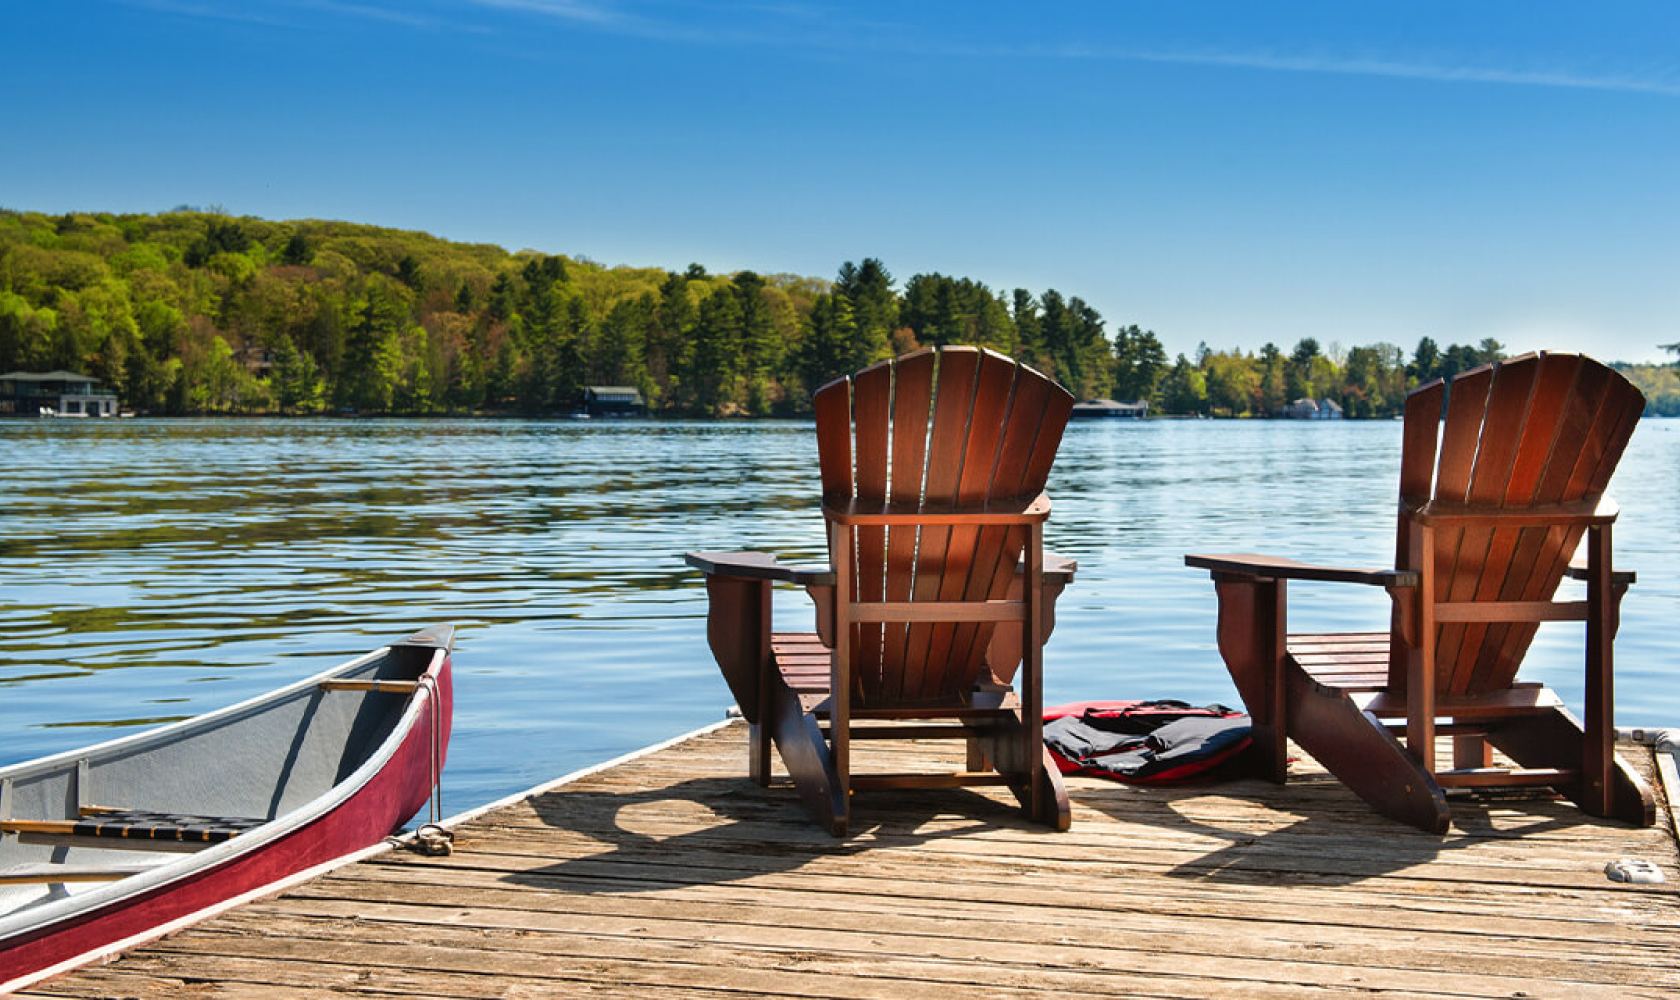 Two wooden chairs sit on a lakeside dock, next to a canoe.